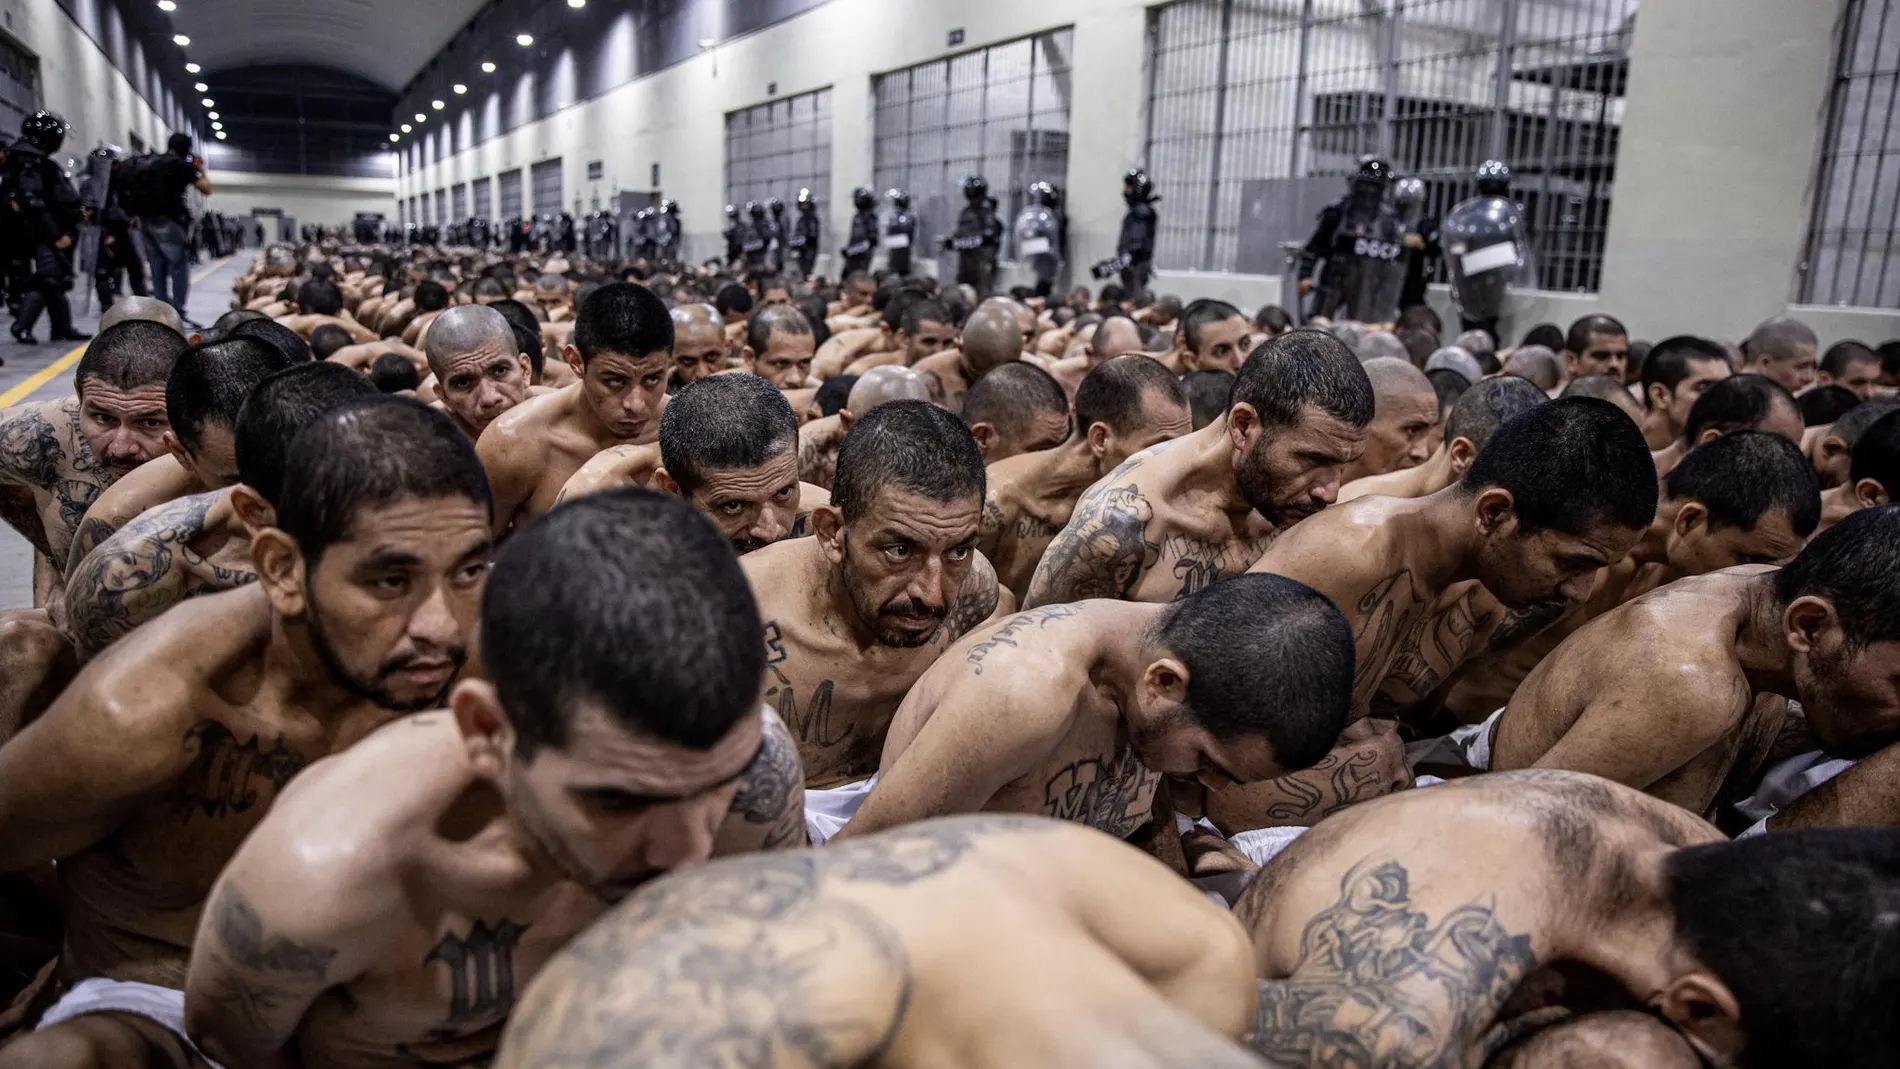 This handout picture released by the El Salvador's Presidency shows the second arrival of inmates belonging to the MS-13 and 18 gangs to the new prison "Terrorist Confinement Centre" (CECOT) in Tecoluca, 74 km southeast of San Salvador, on March 15, 2023. - The "Terrorist Confinement Centre" (CECOT), "America's largest" mega-prison, is equipped with high-tech surveillance and designed to house 40,000 criminals.